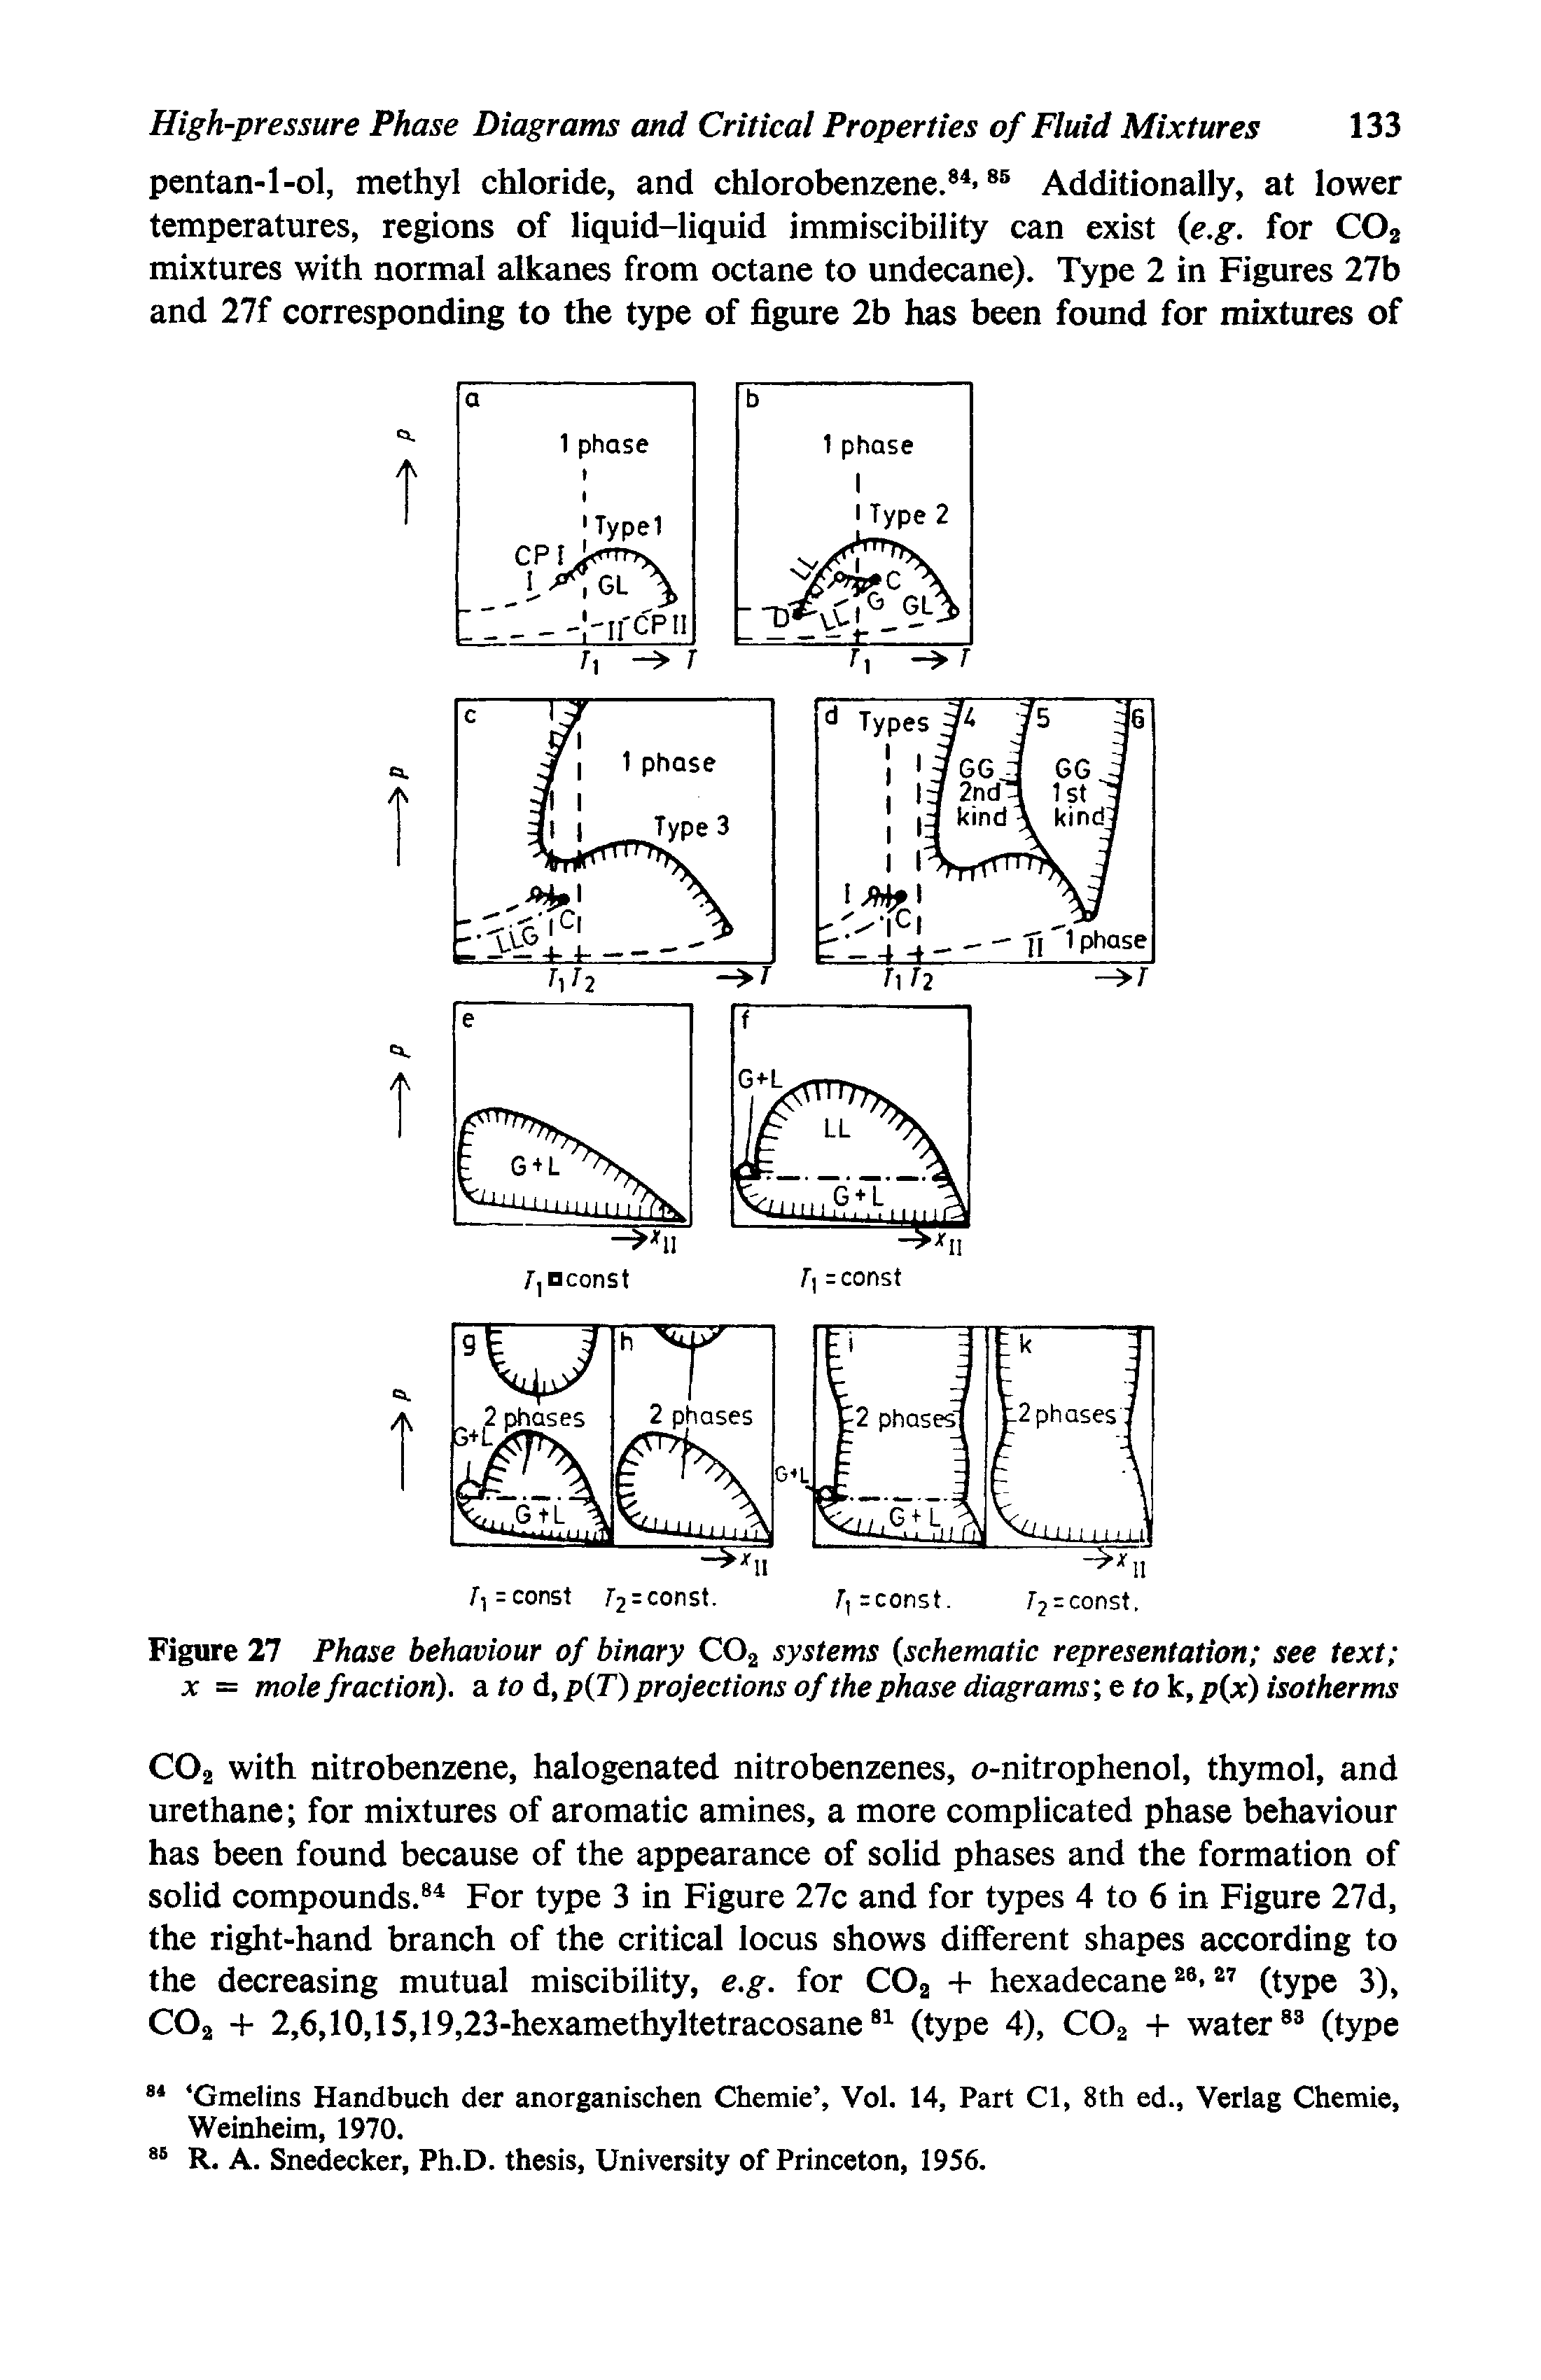 Figure 27 Phase behaviour of binary CO2 systems schematic representation see text X = mole fraction), a to d, p X) projections of the phase diagrams e to k, p x) isotherms...